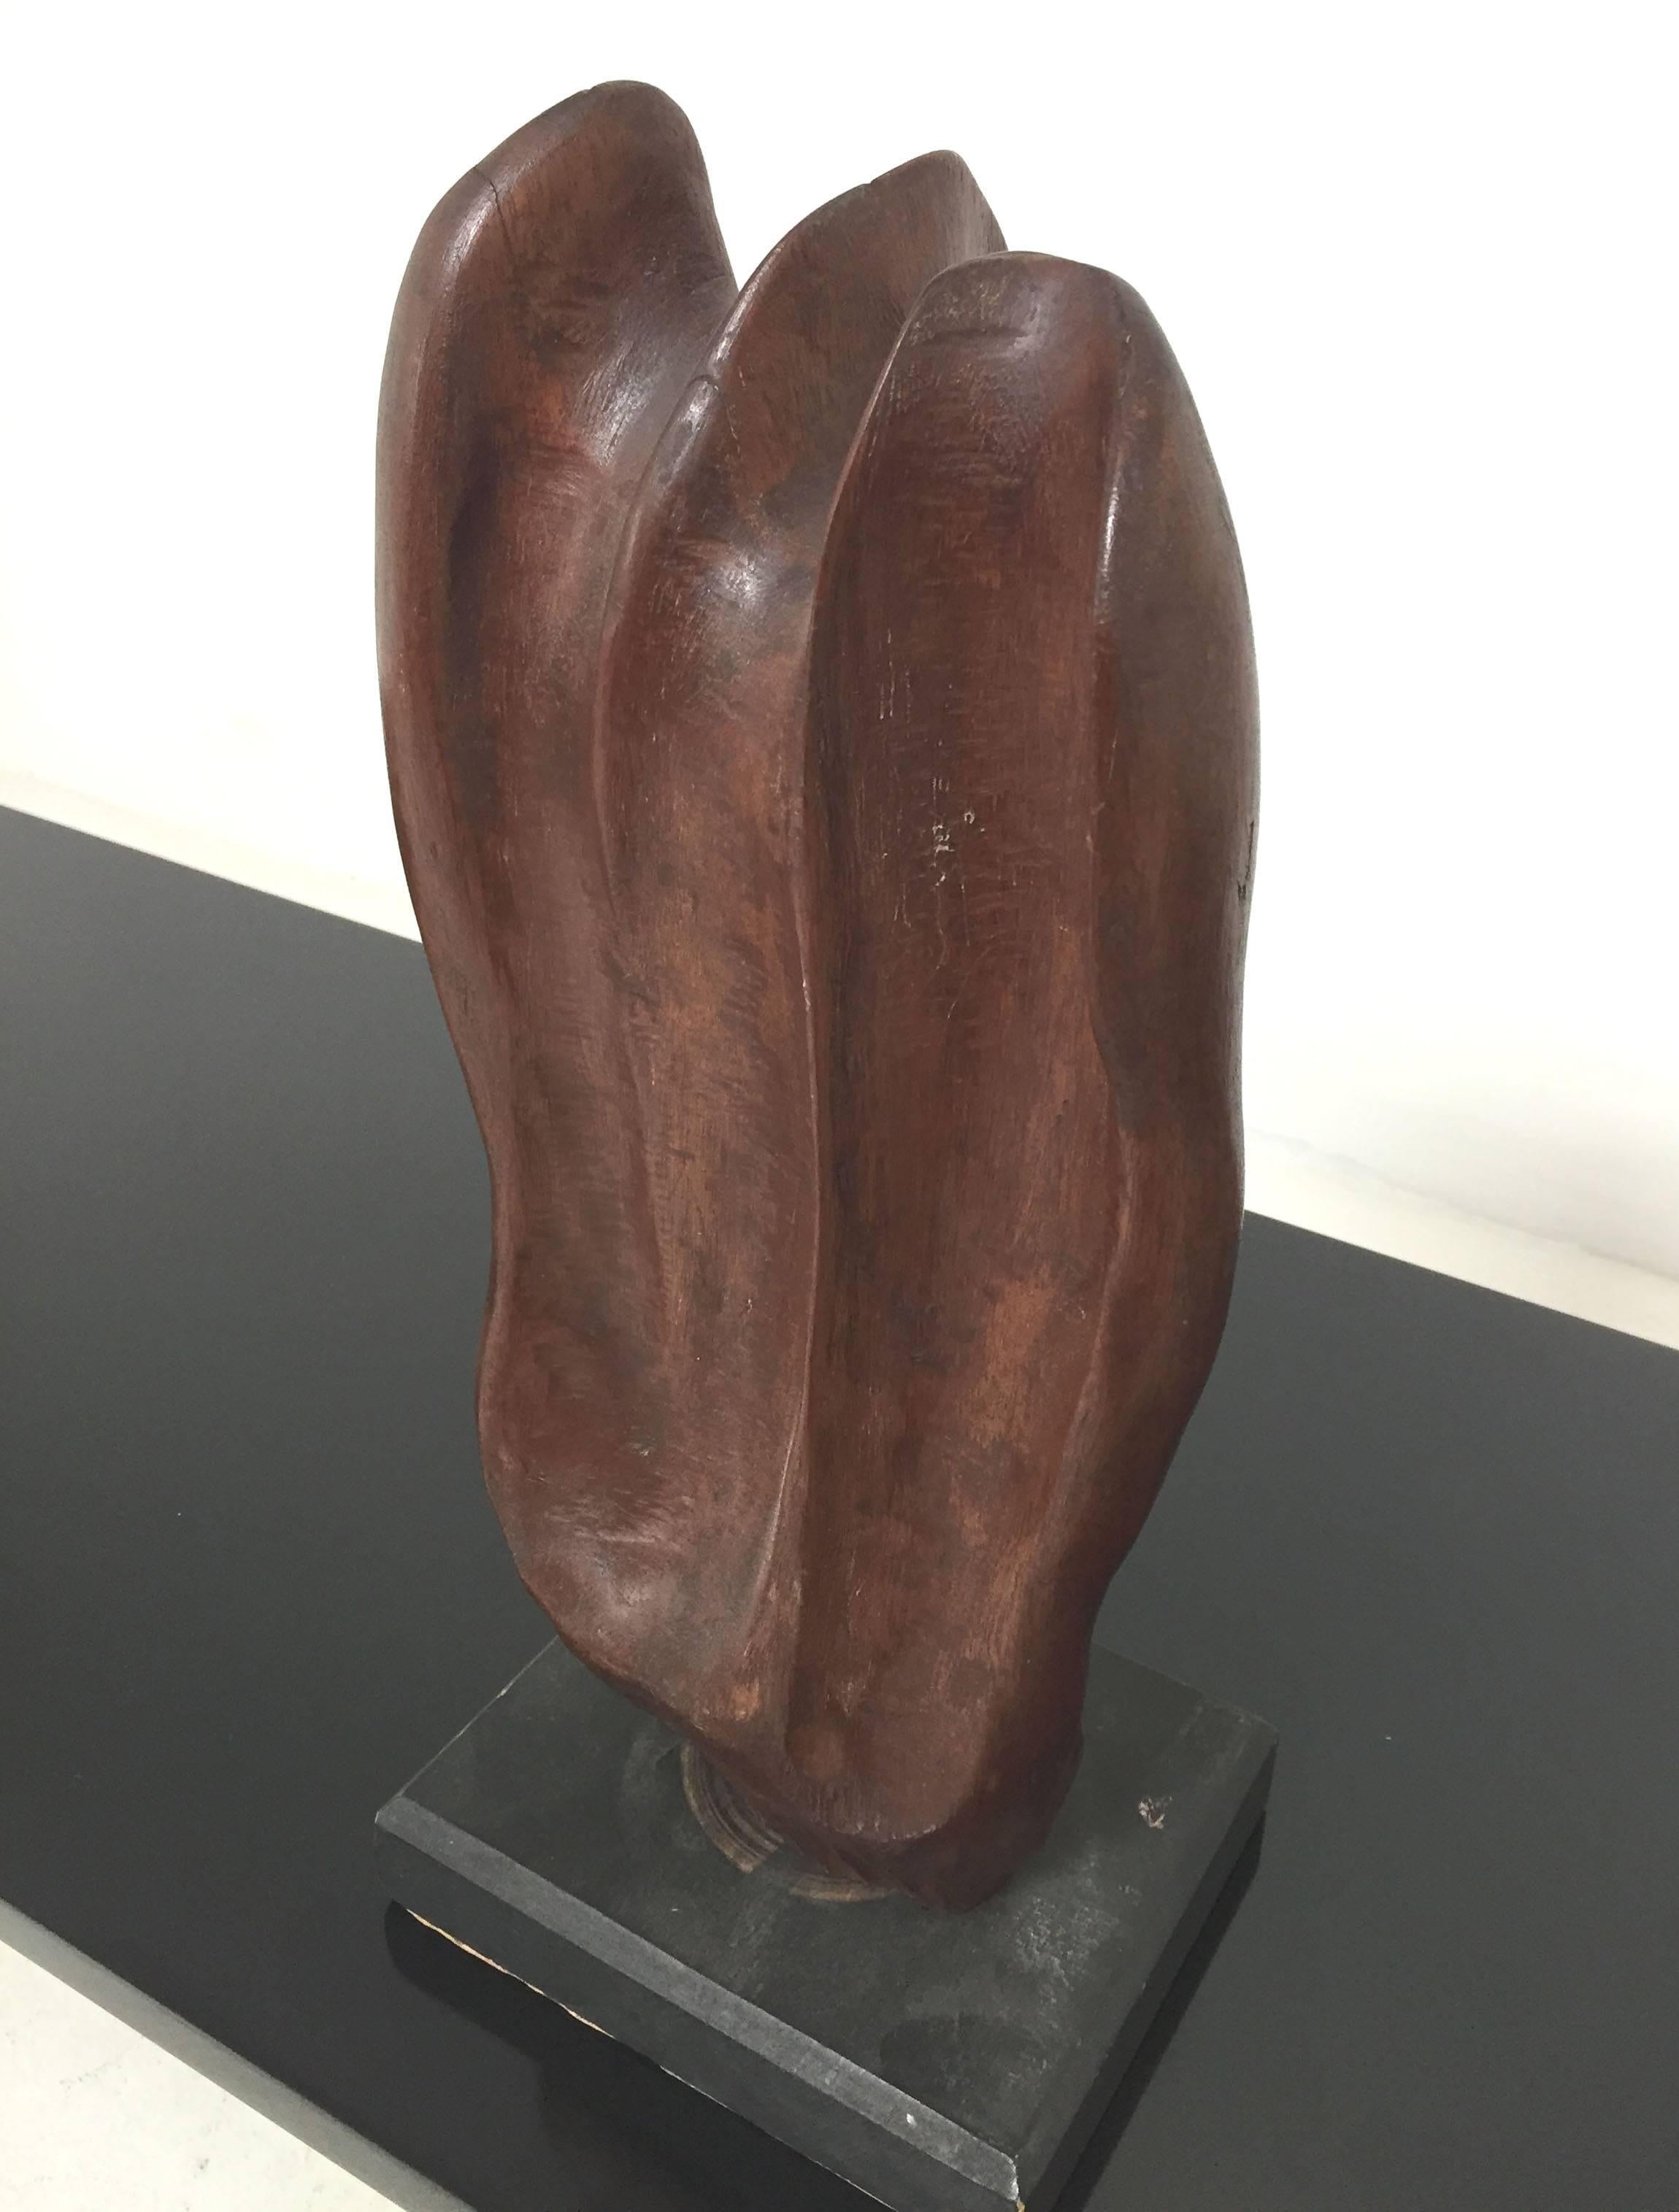 Mid-Century Modern Abstract Carved Wood Sculpture Titled “Eternal Flame” by Skolnikoff, 1967